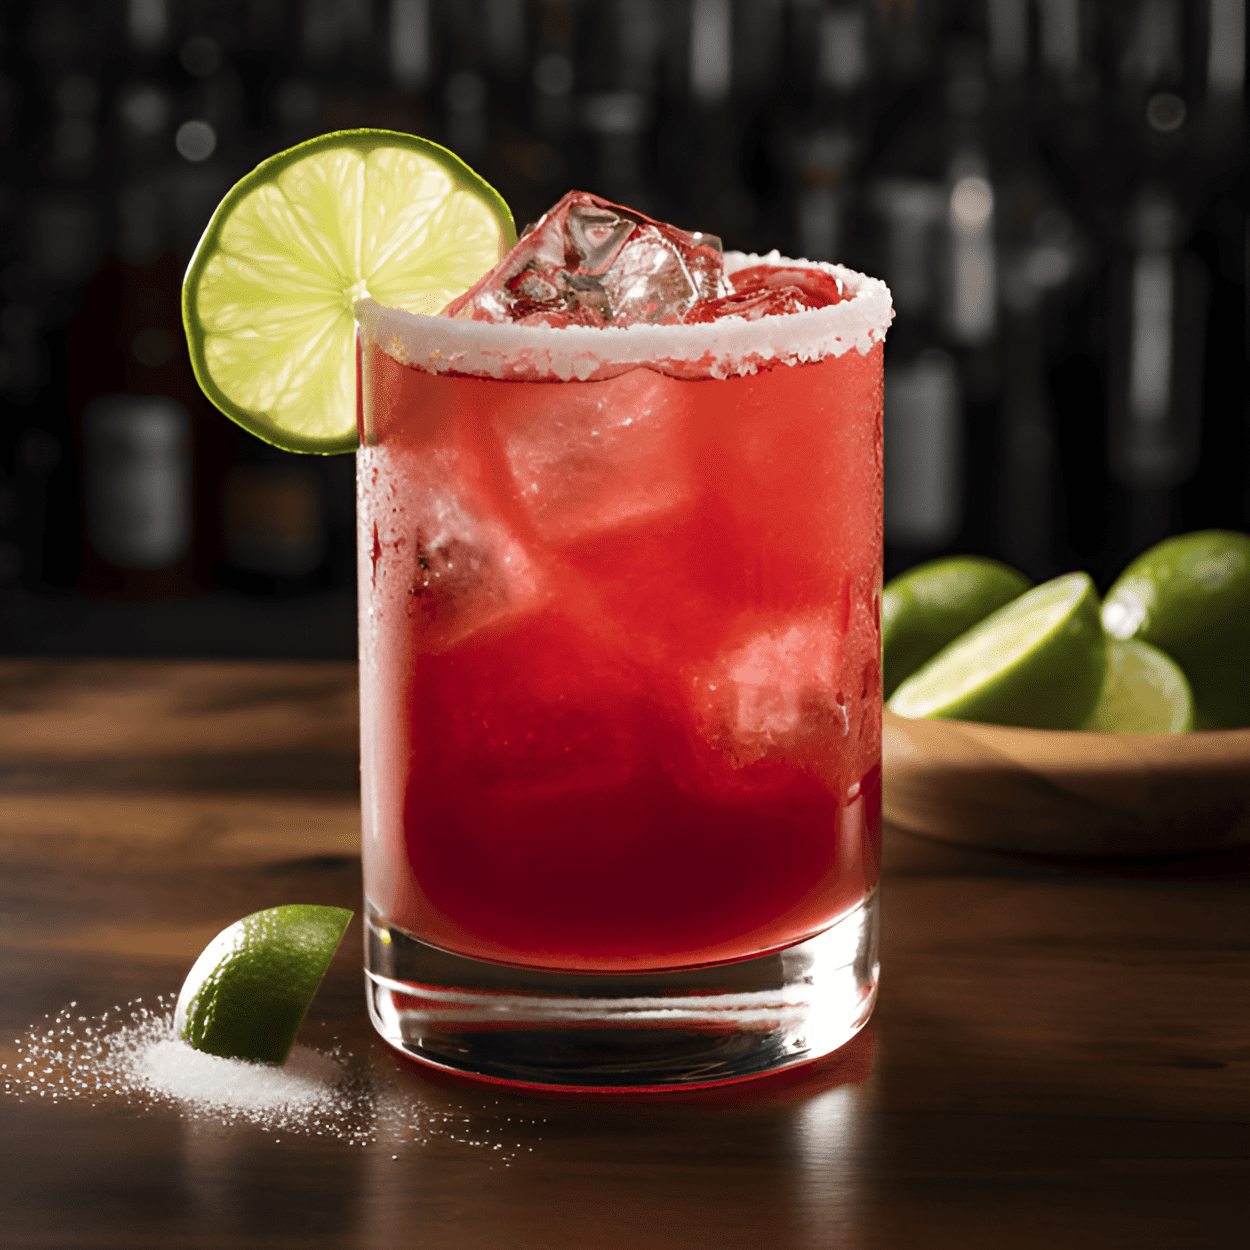 Chavelas Cocktail Recipe - Chavelas has a unique taste that is both spicy and refreshing. The beer provides a light, crisp base, while the tomato juice adds a tangy sweetness. The lime gives it a citrusy punch, and the hot sauce brings a fiery kick. It's a well-balanced cocktail that is both savory and thirst-quenching.